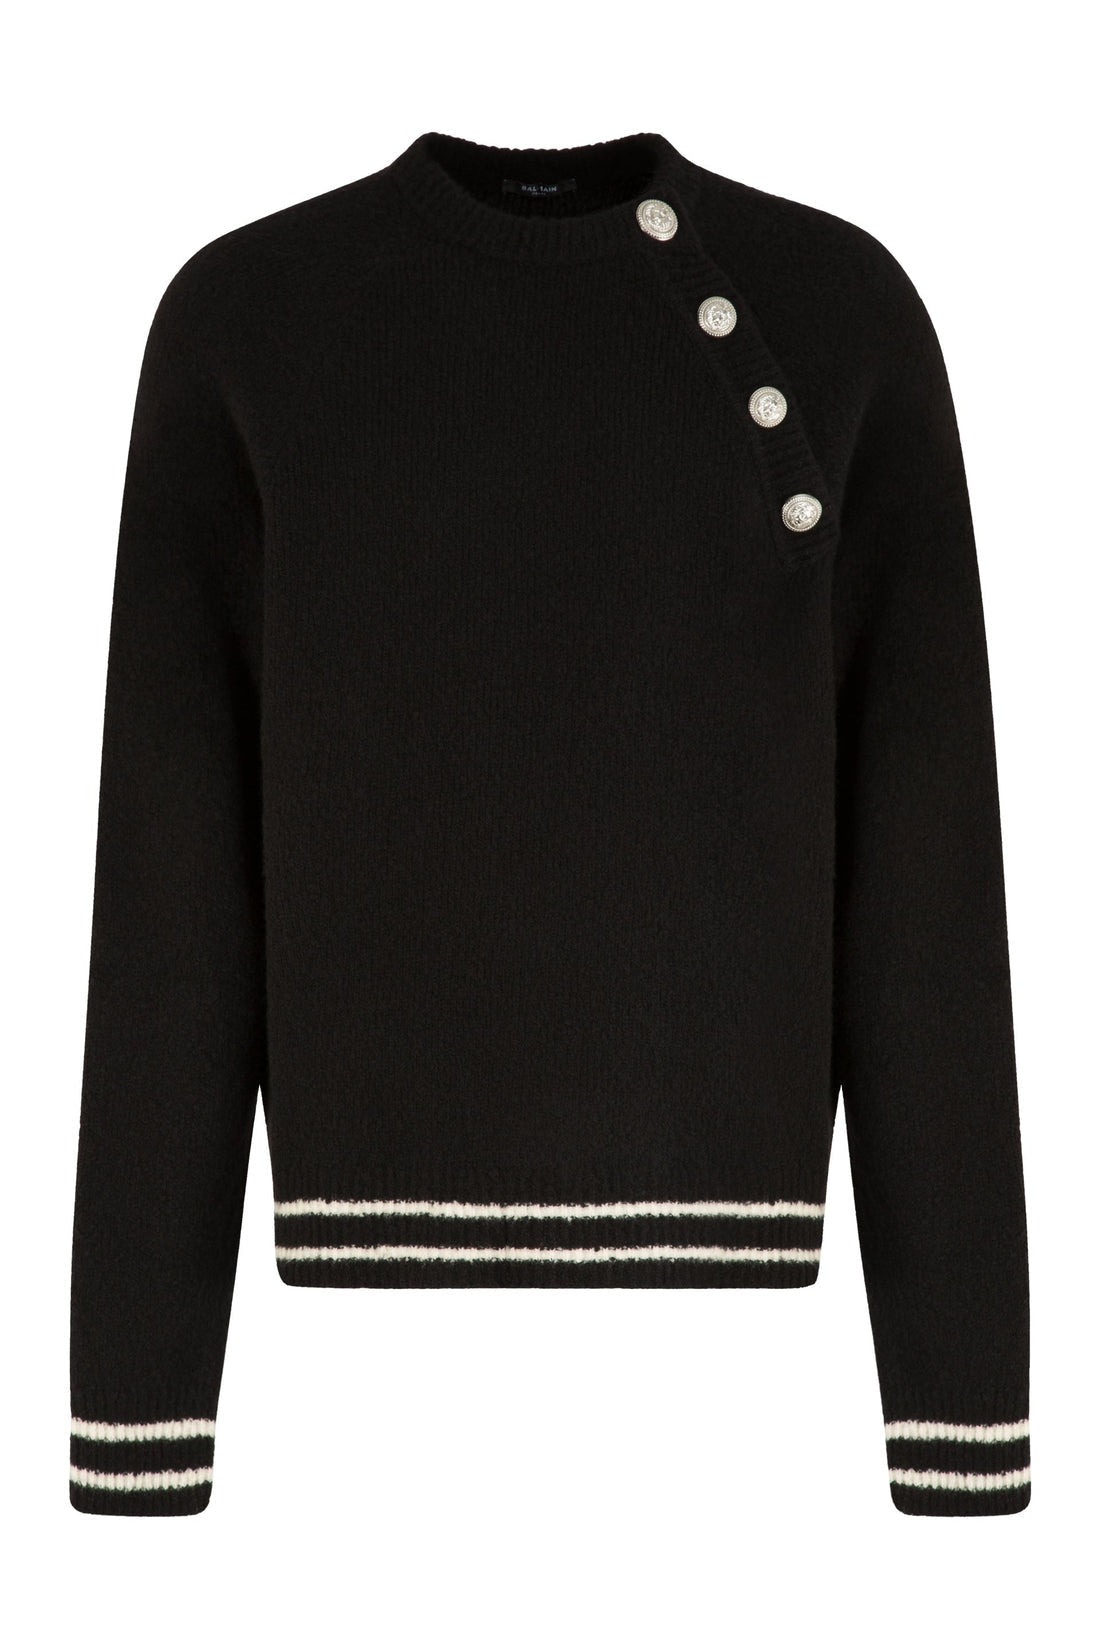 Balmain-OUTLET-SALE-Virgin wool and cashmere pullover-ARCHIVIST